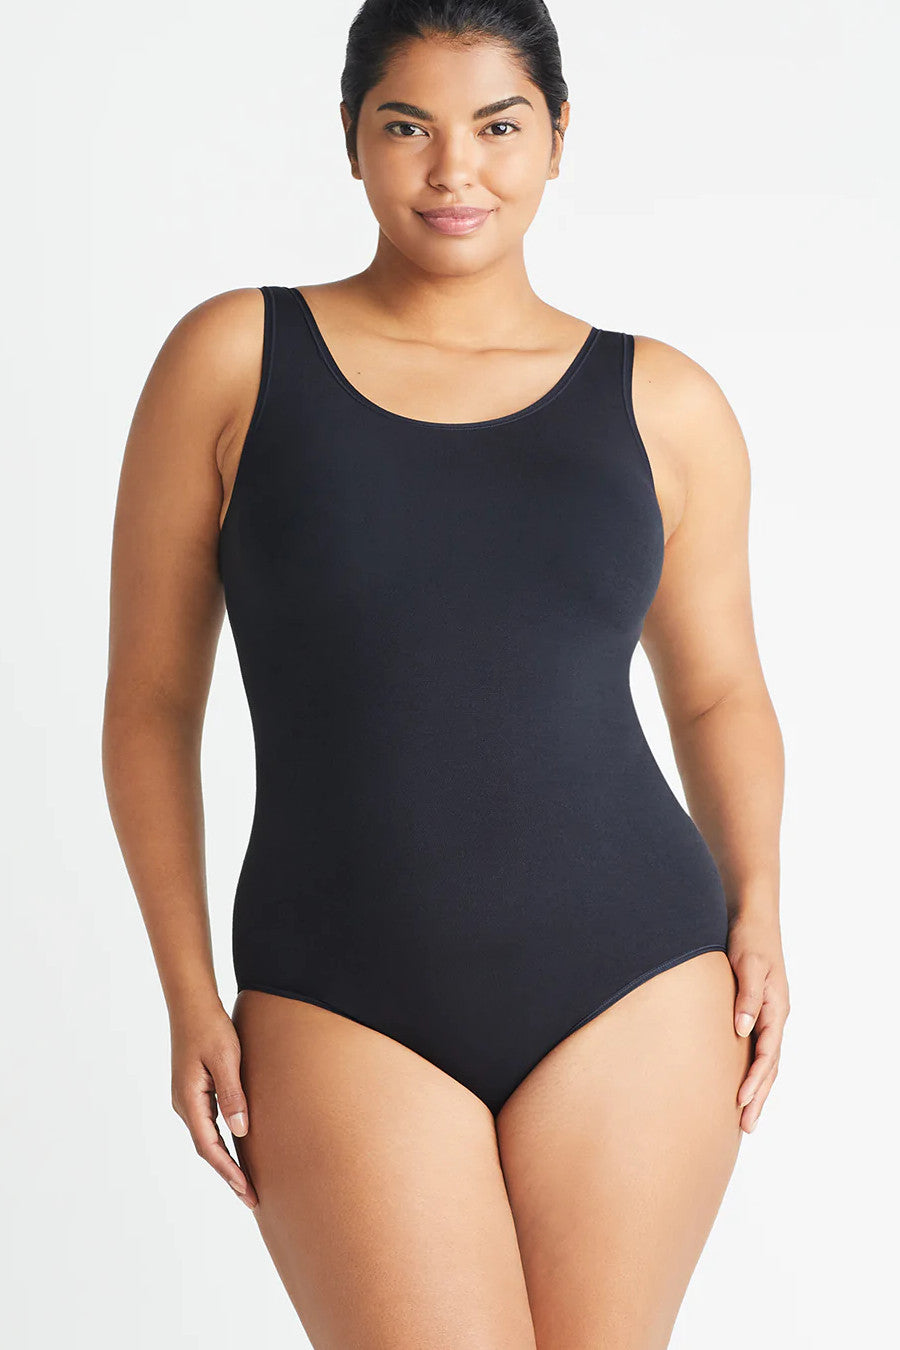 Shaping Bodysuits - Meet the Ruby Shaping Thong Bodysuit in Black